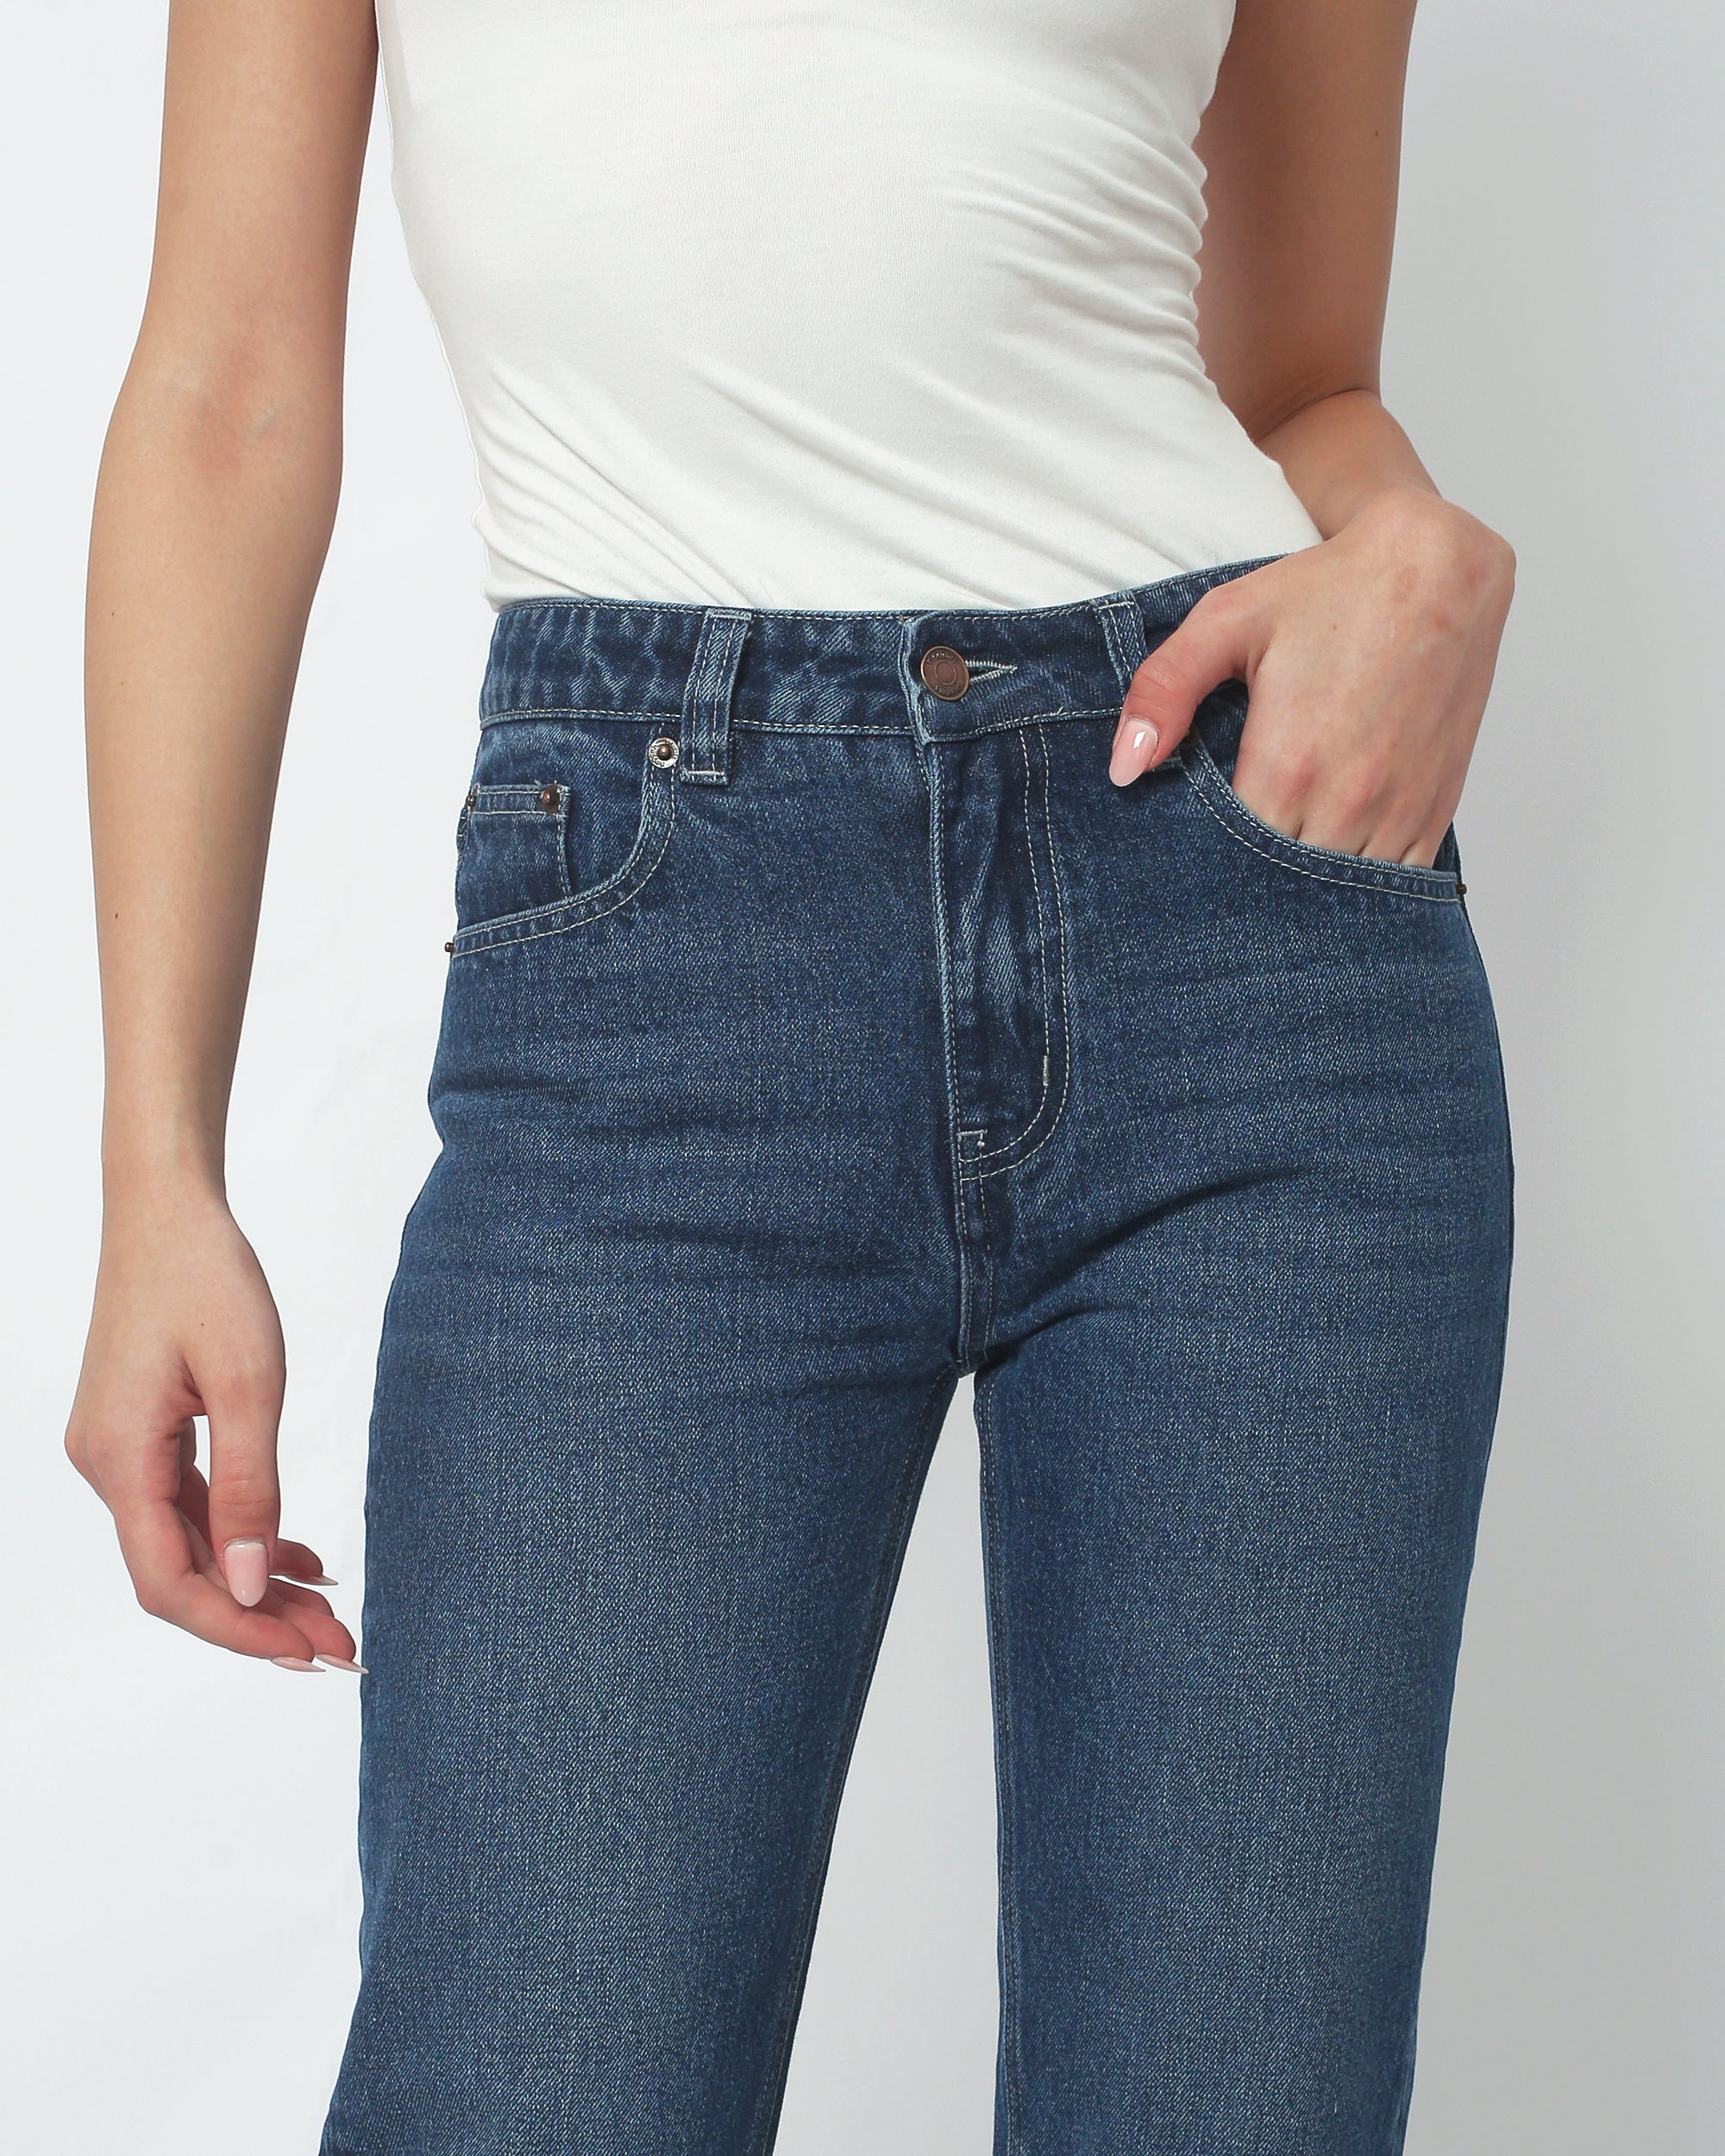 Boyfriend Jeans vs Mom Jeans The Difference  How To Style